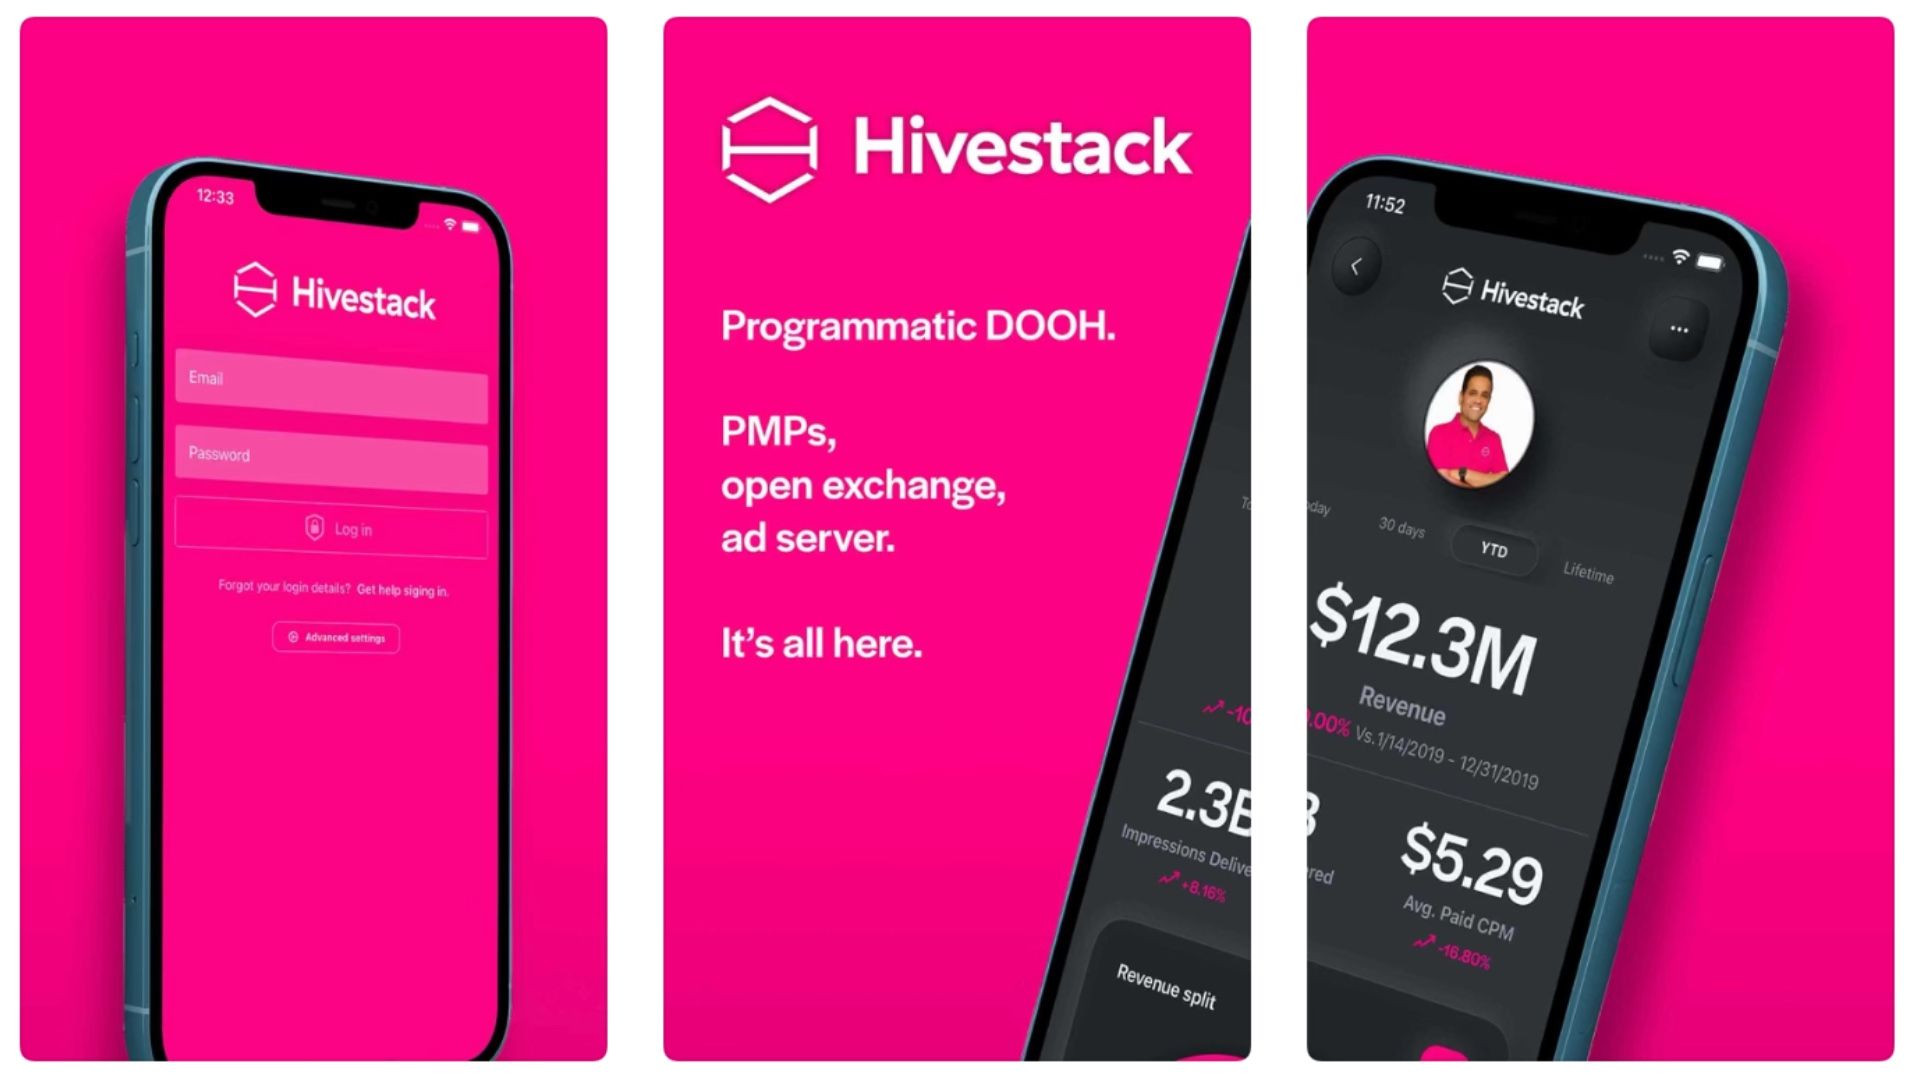 Hivestack launches an iOS app for buyers and sellers